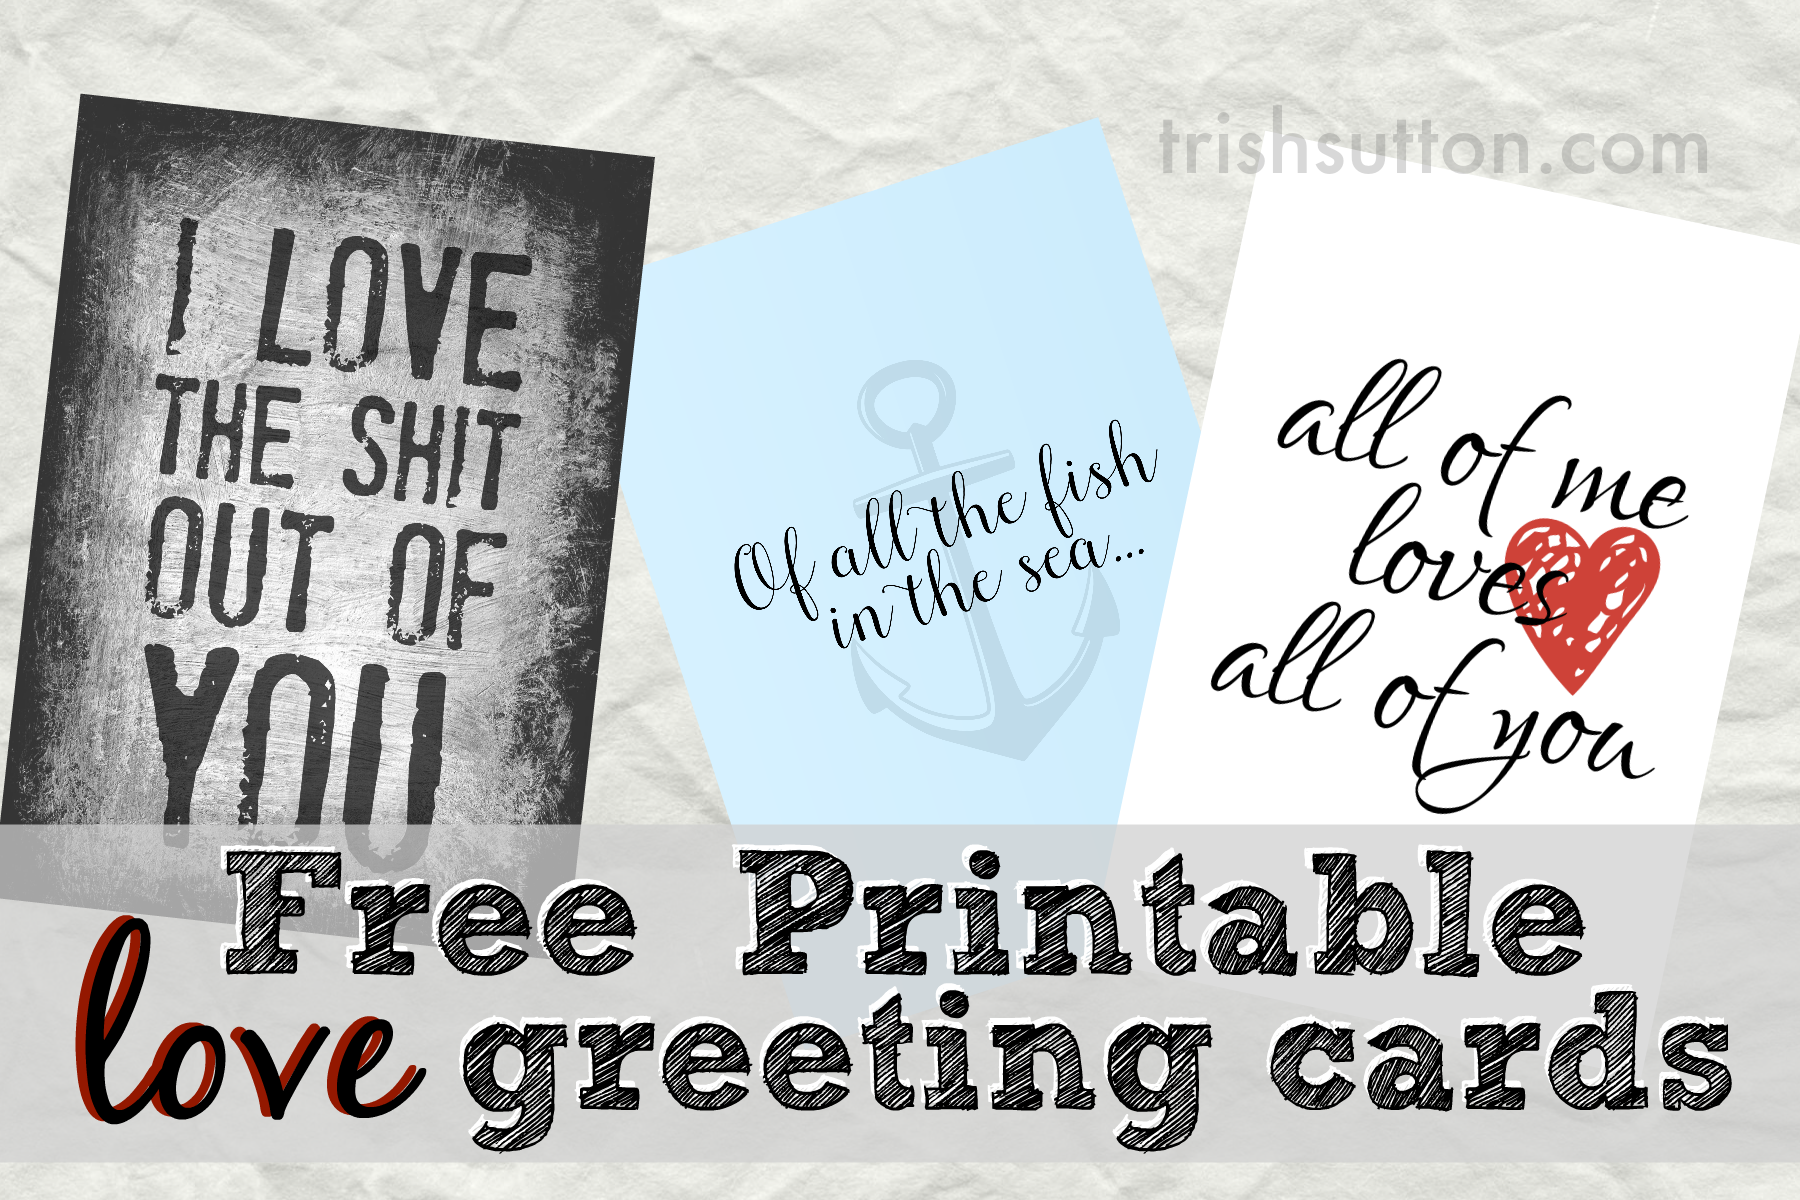 all-of-me-loves-all-of-you-three-free-printable-greeting-cards